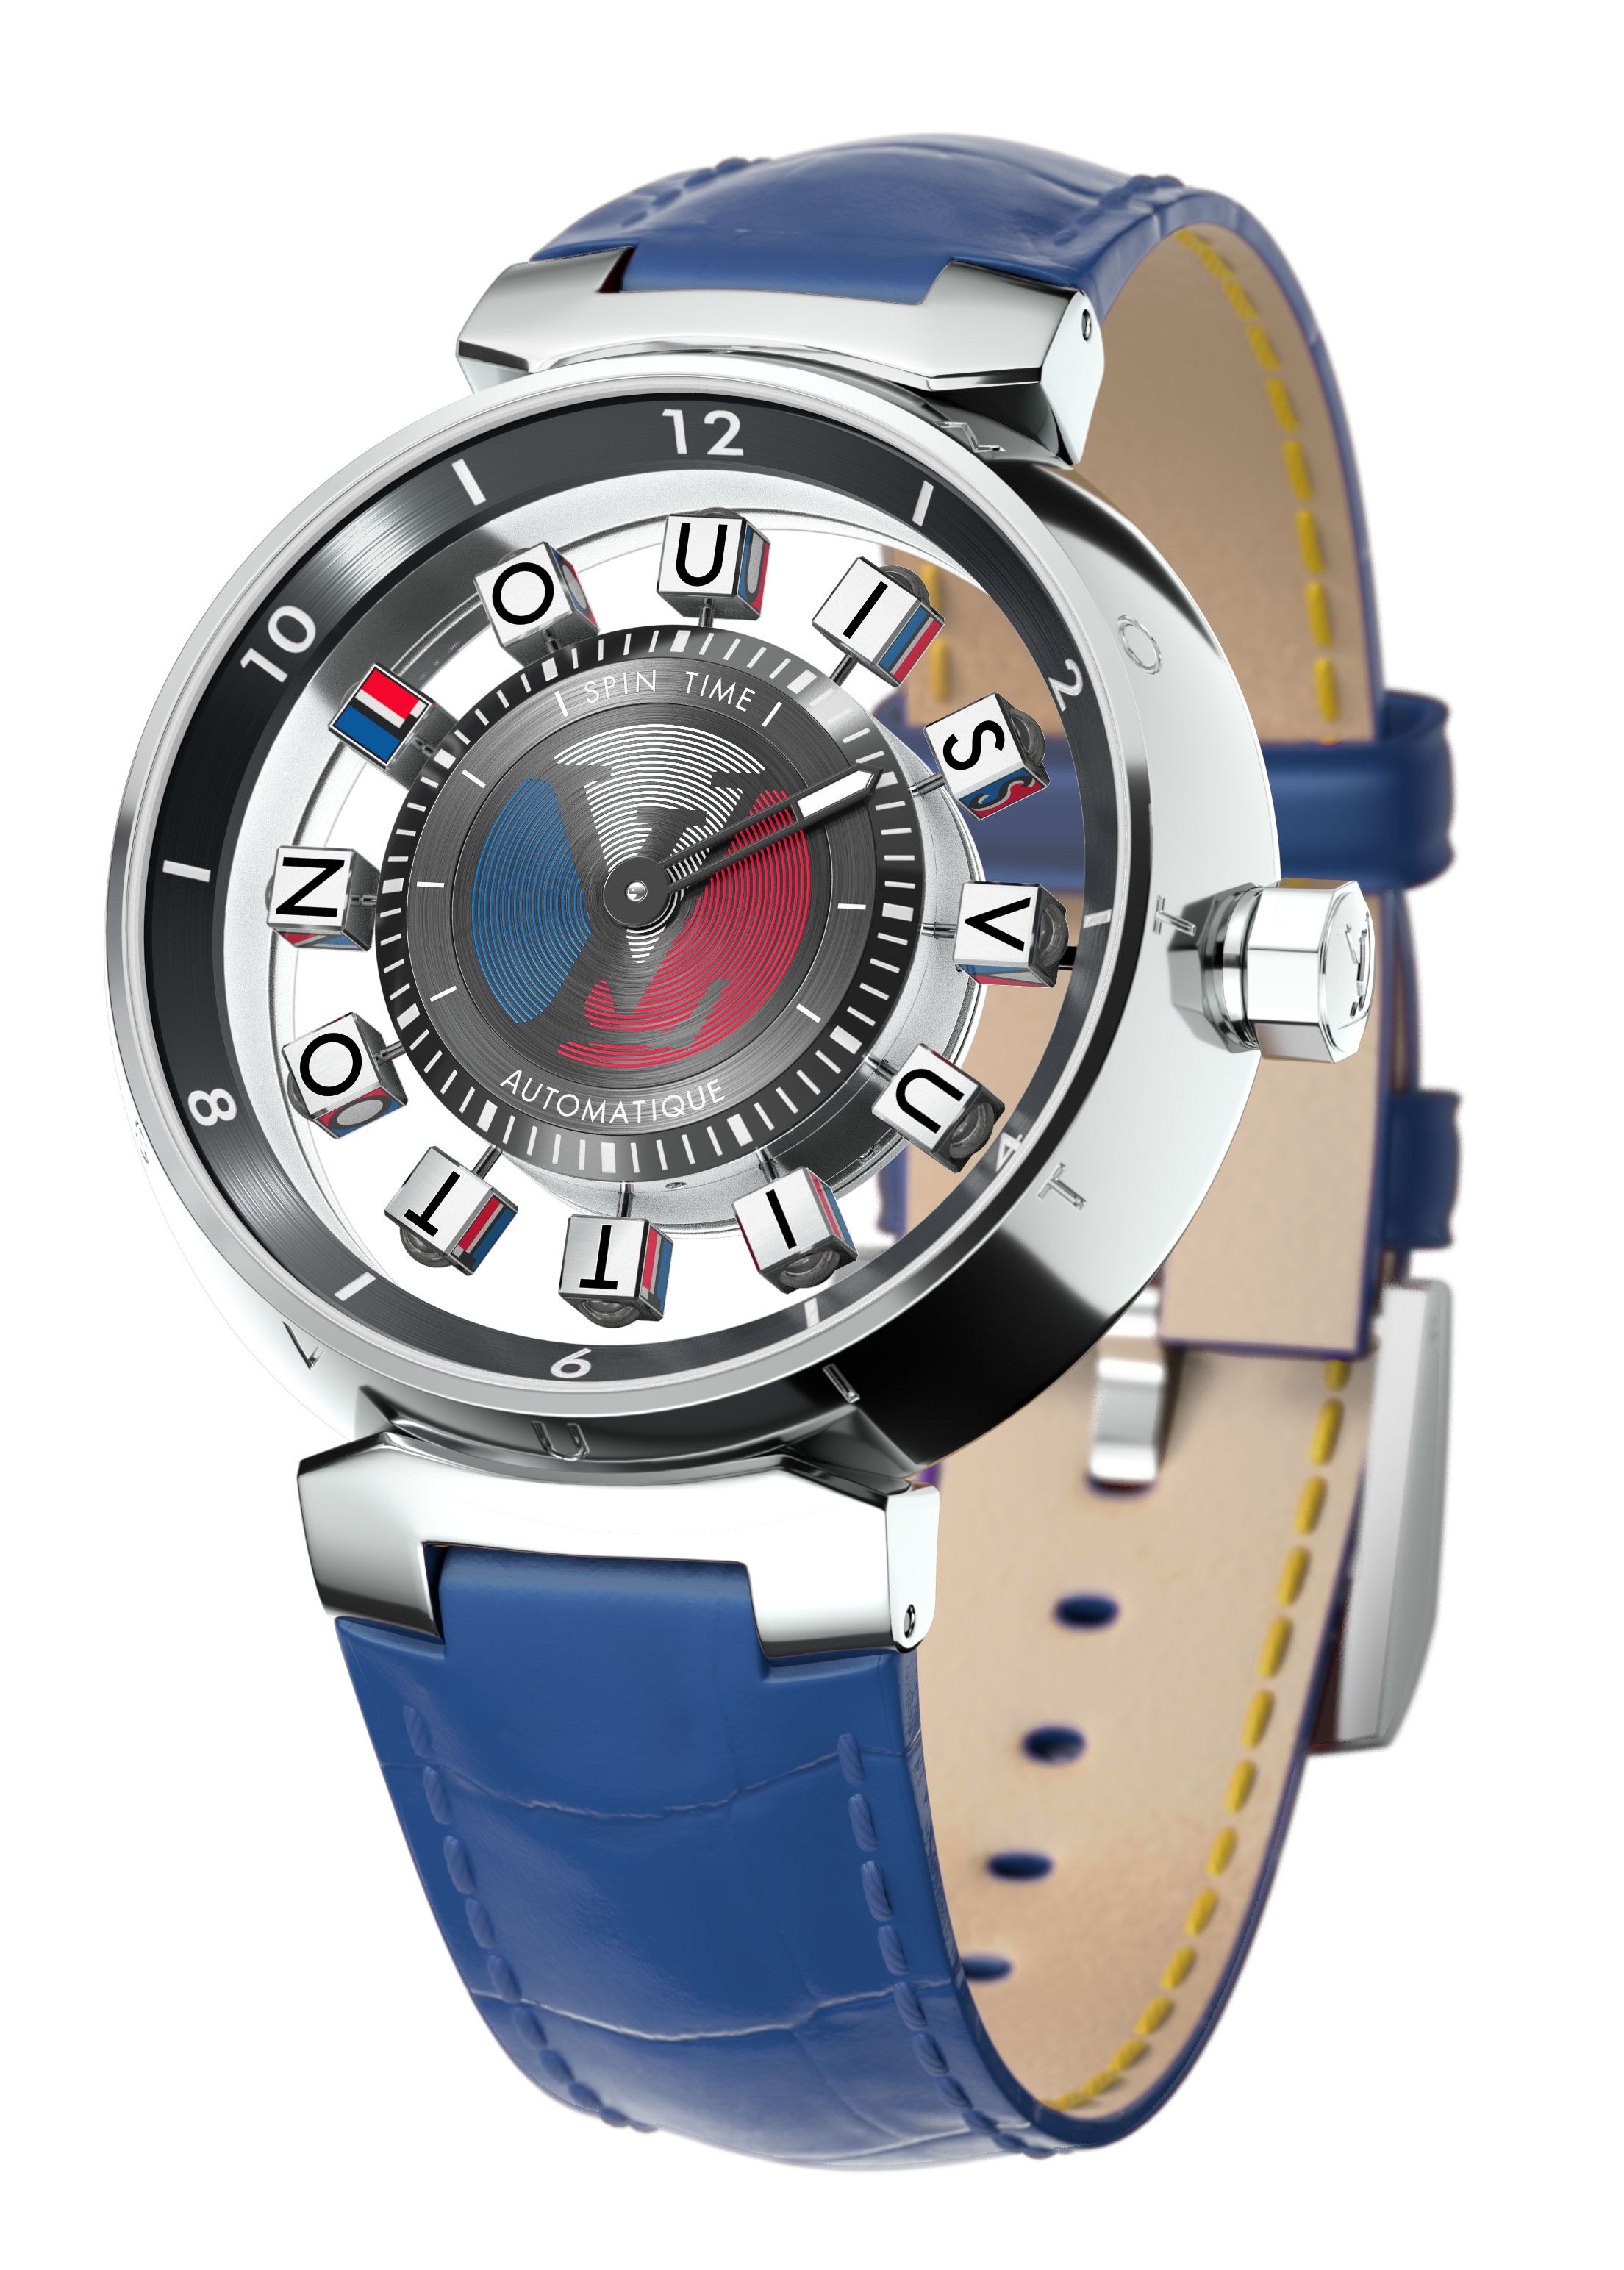 Louis Vuitton Tambour Moon Dual Time is a GMT to clock up air miles